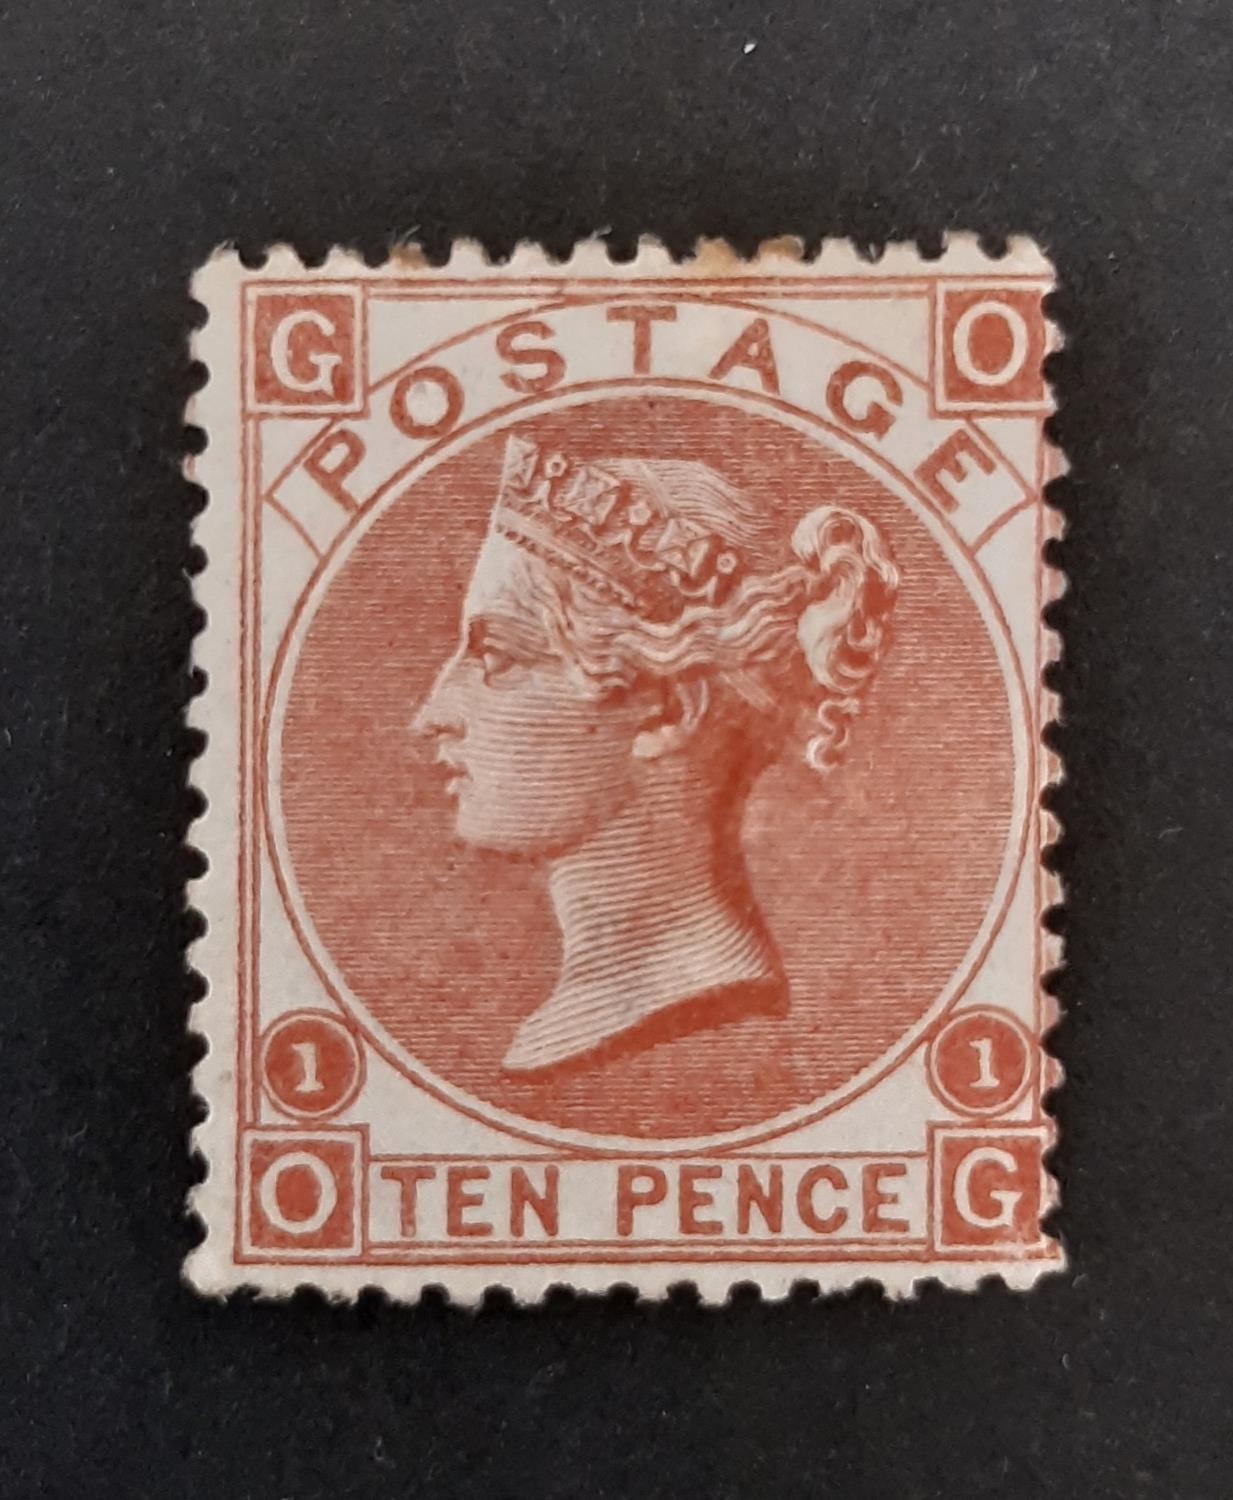 1867-80 QV SG112 10d red-brown. LMM example with very light toning spots on top perfs. Cat £3,500.